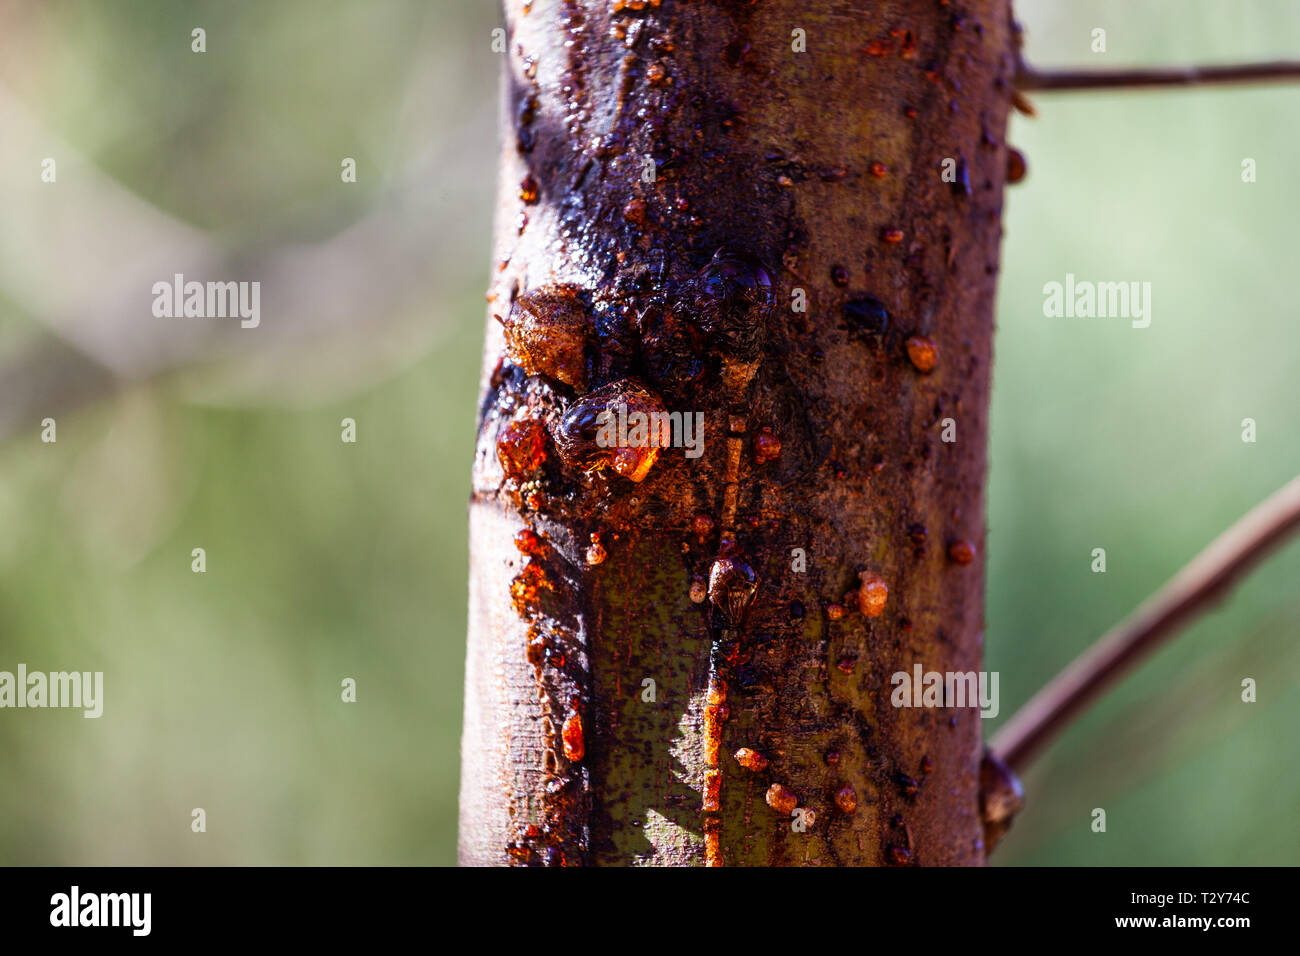 Gum tree sap oozing from trunk on blurred background Stock Photo